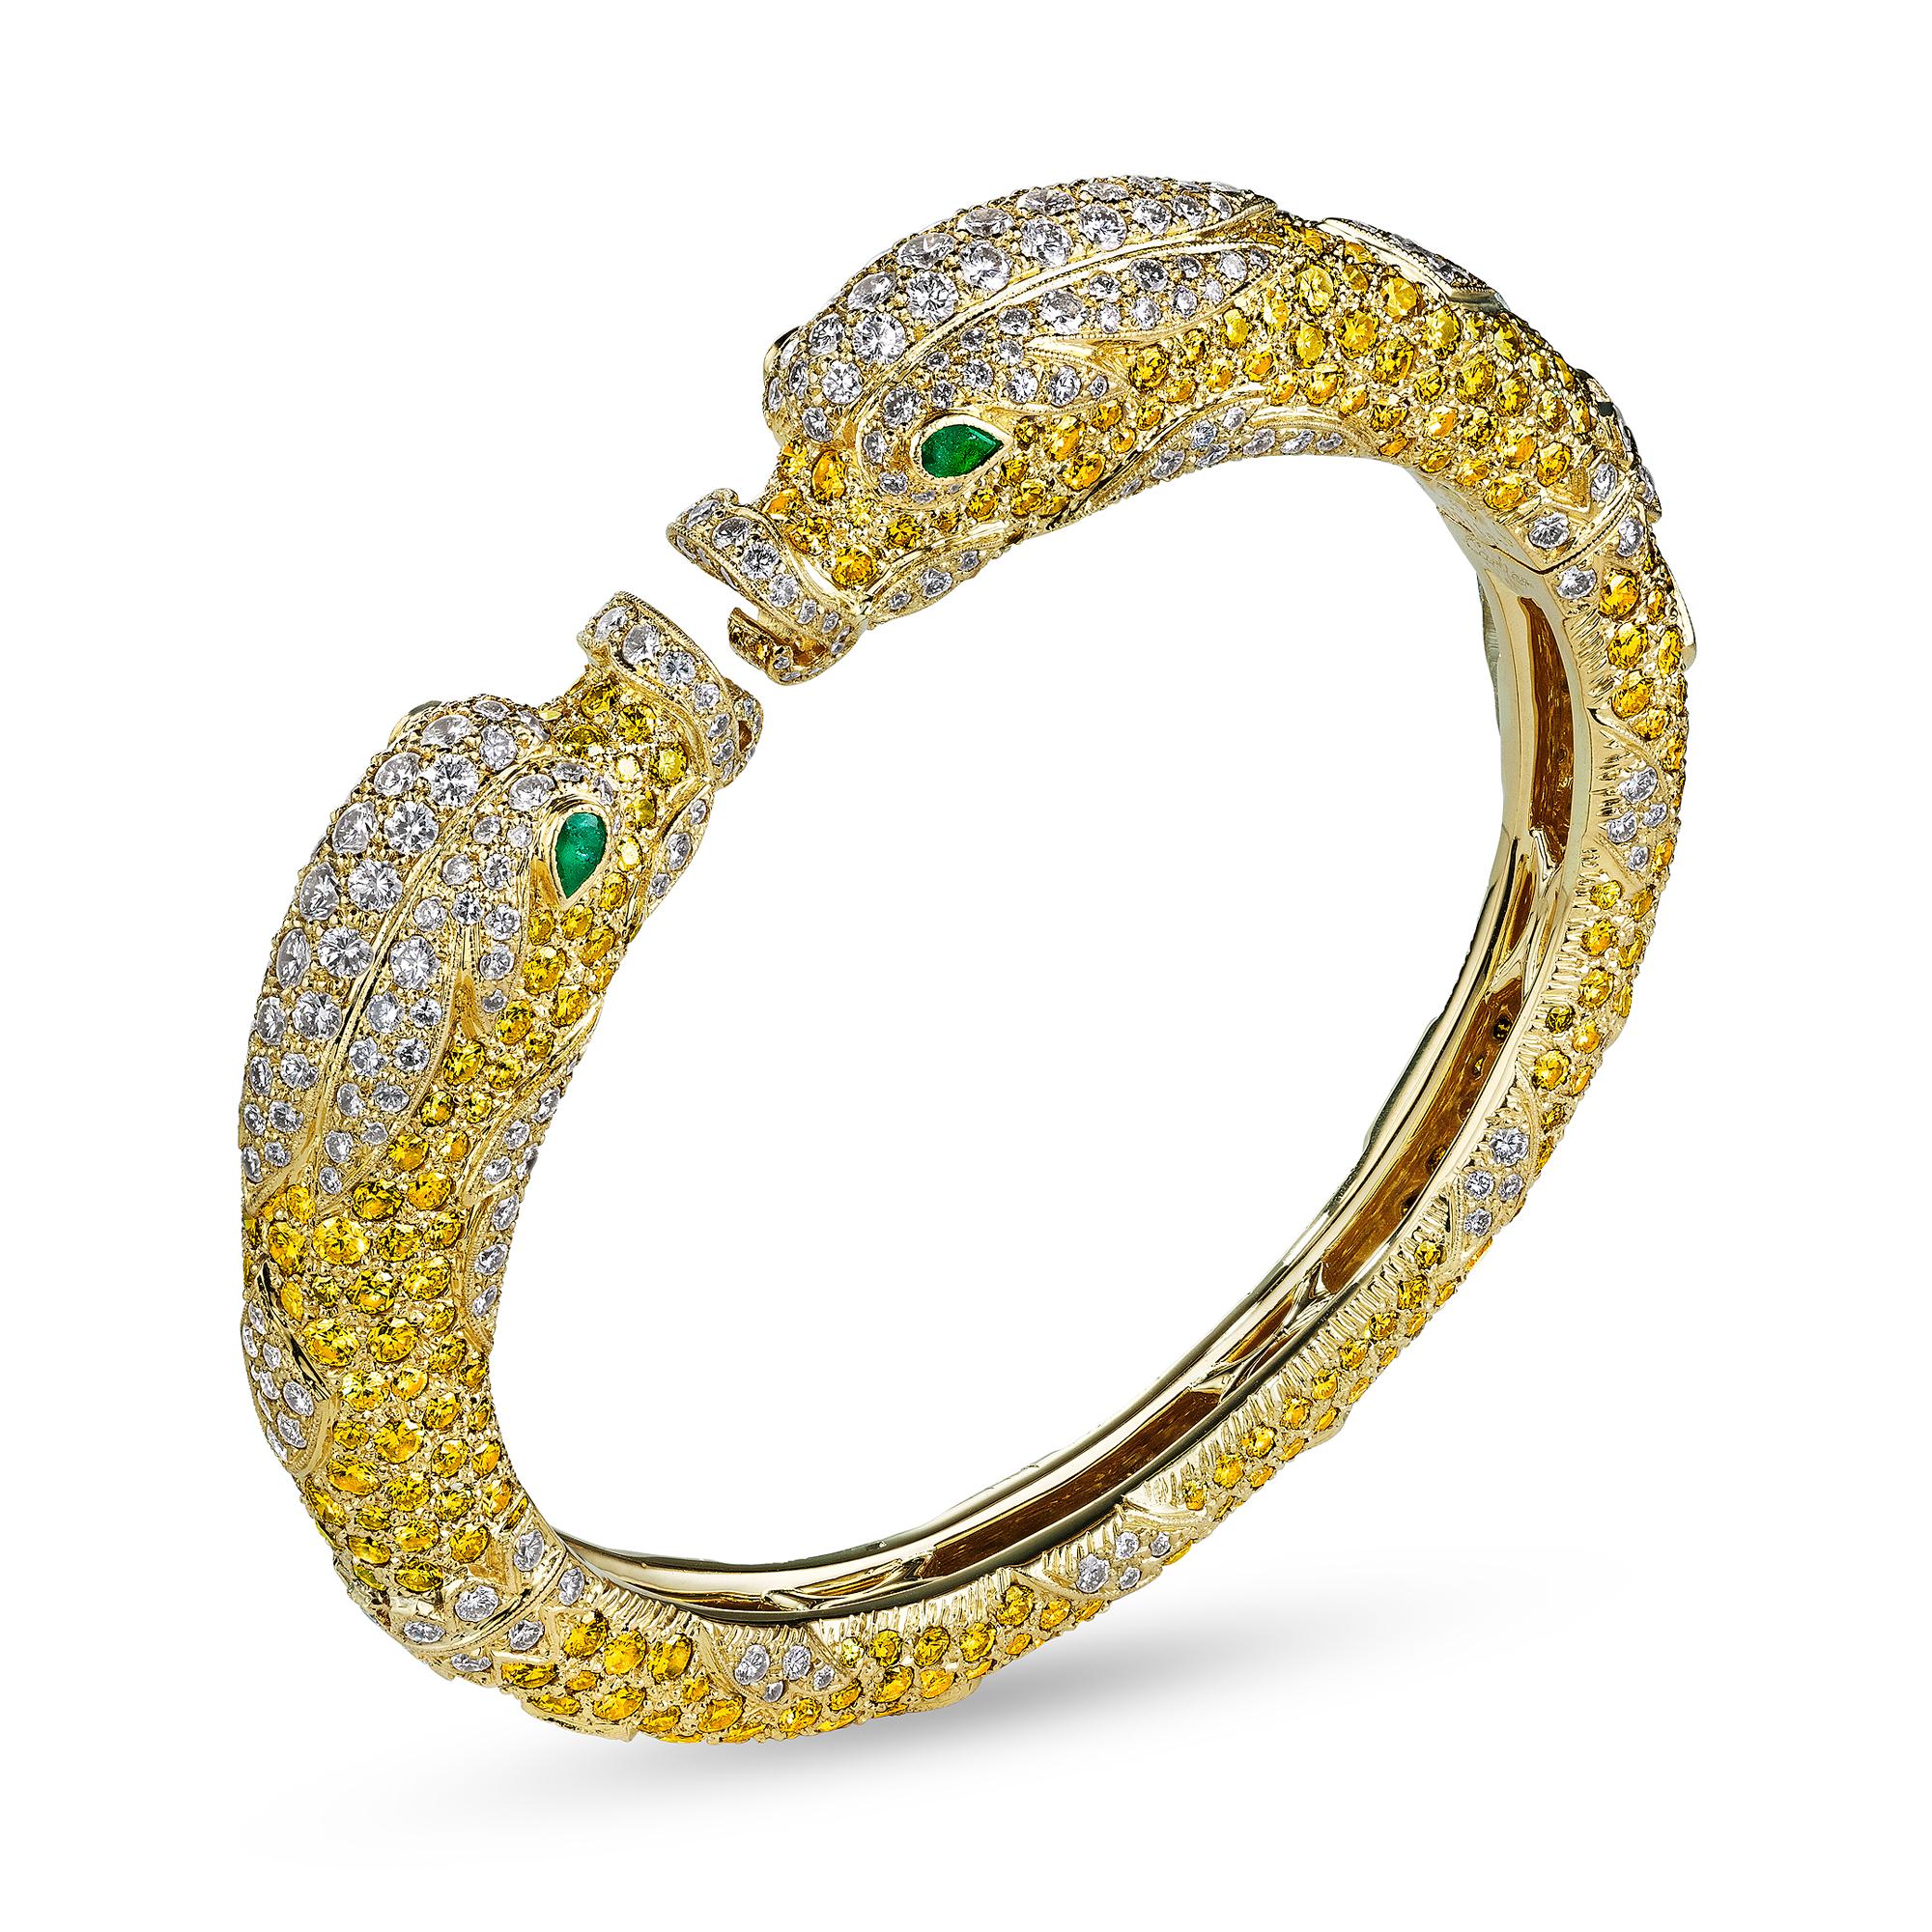 This Cartier Paris 'Chimera' hinged bracelet is rare, imaginative, and has a magical soul.   Designed in the 1970's, this fantastical once-in-a-lifetime jewel looks like it is on fire when placed on your wrist or in your hand.  Composed of vivid